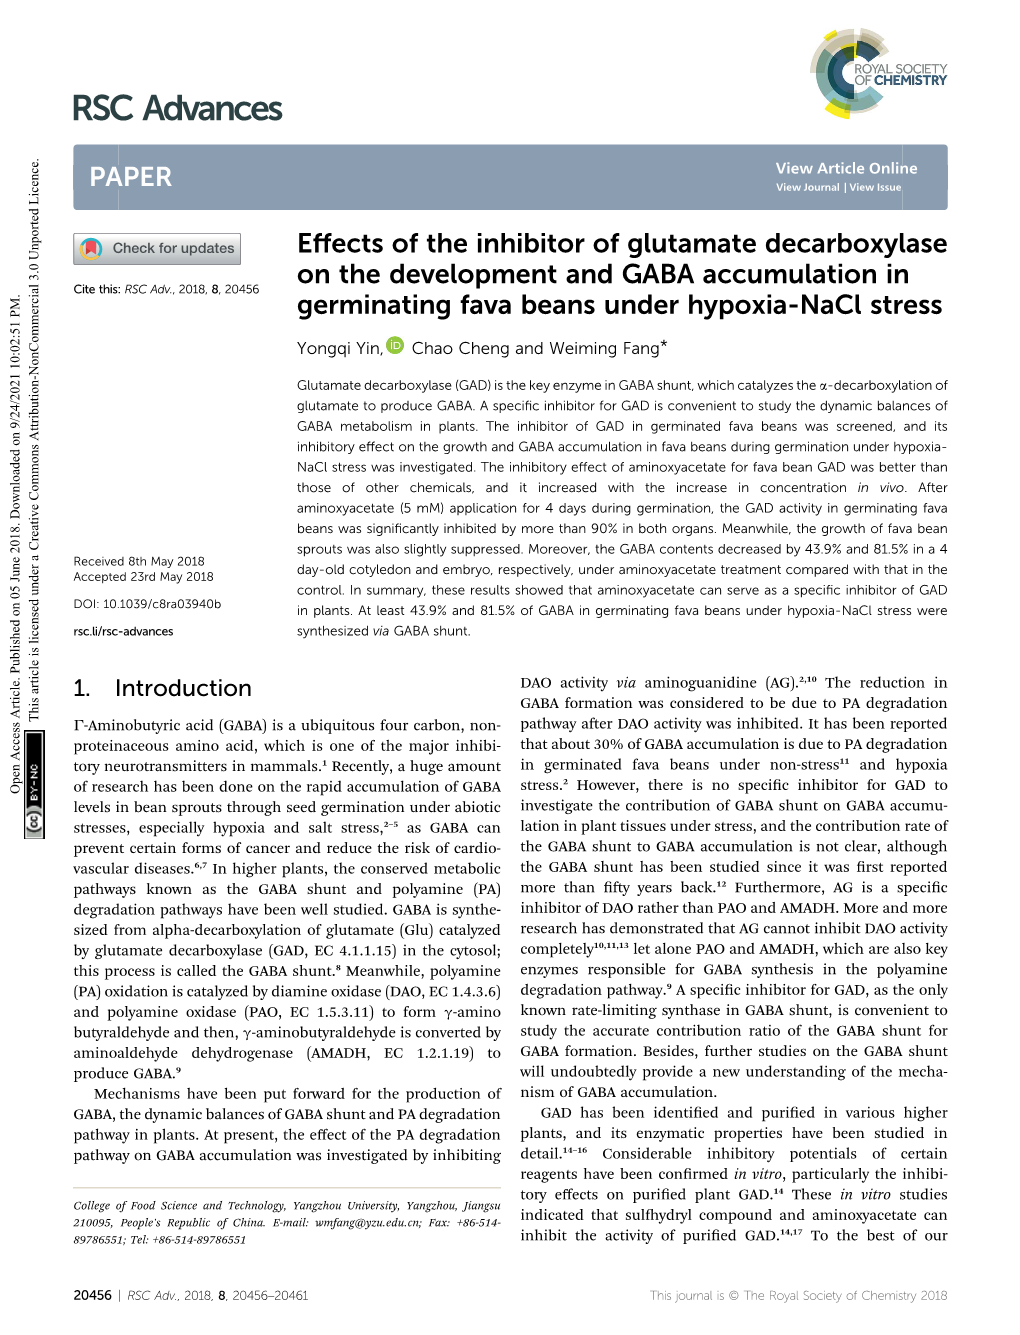 Effects of the Inhibitor of Glutamate Decarboxylase on the Development